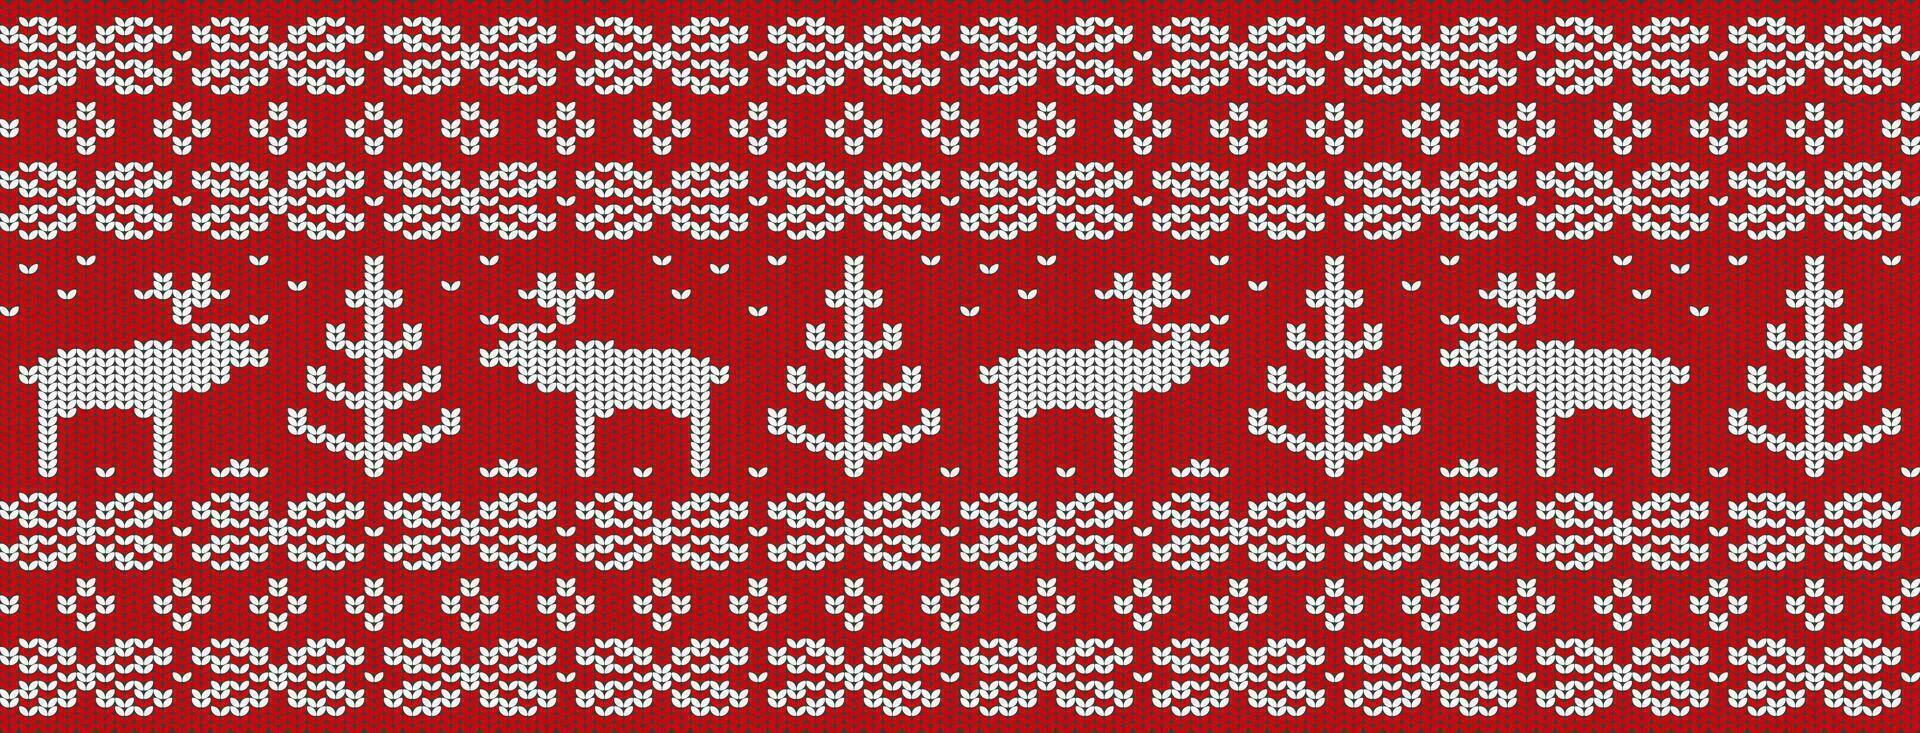 Christmas background, hand-knitted seamless pattern with deers, snowflakes, and Christmas trees. Red winter sweater texture. vector